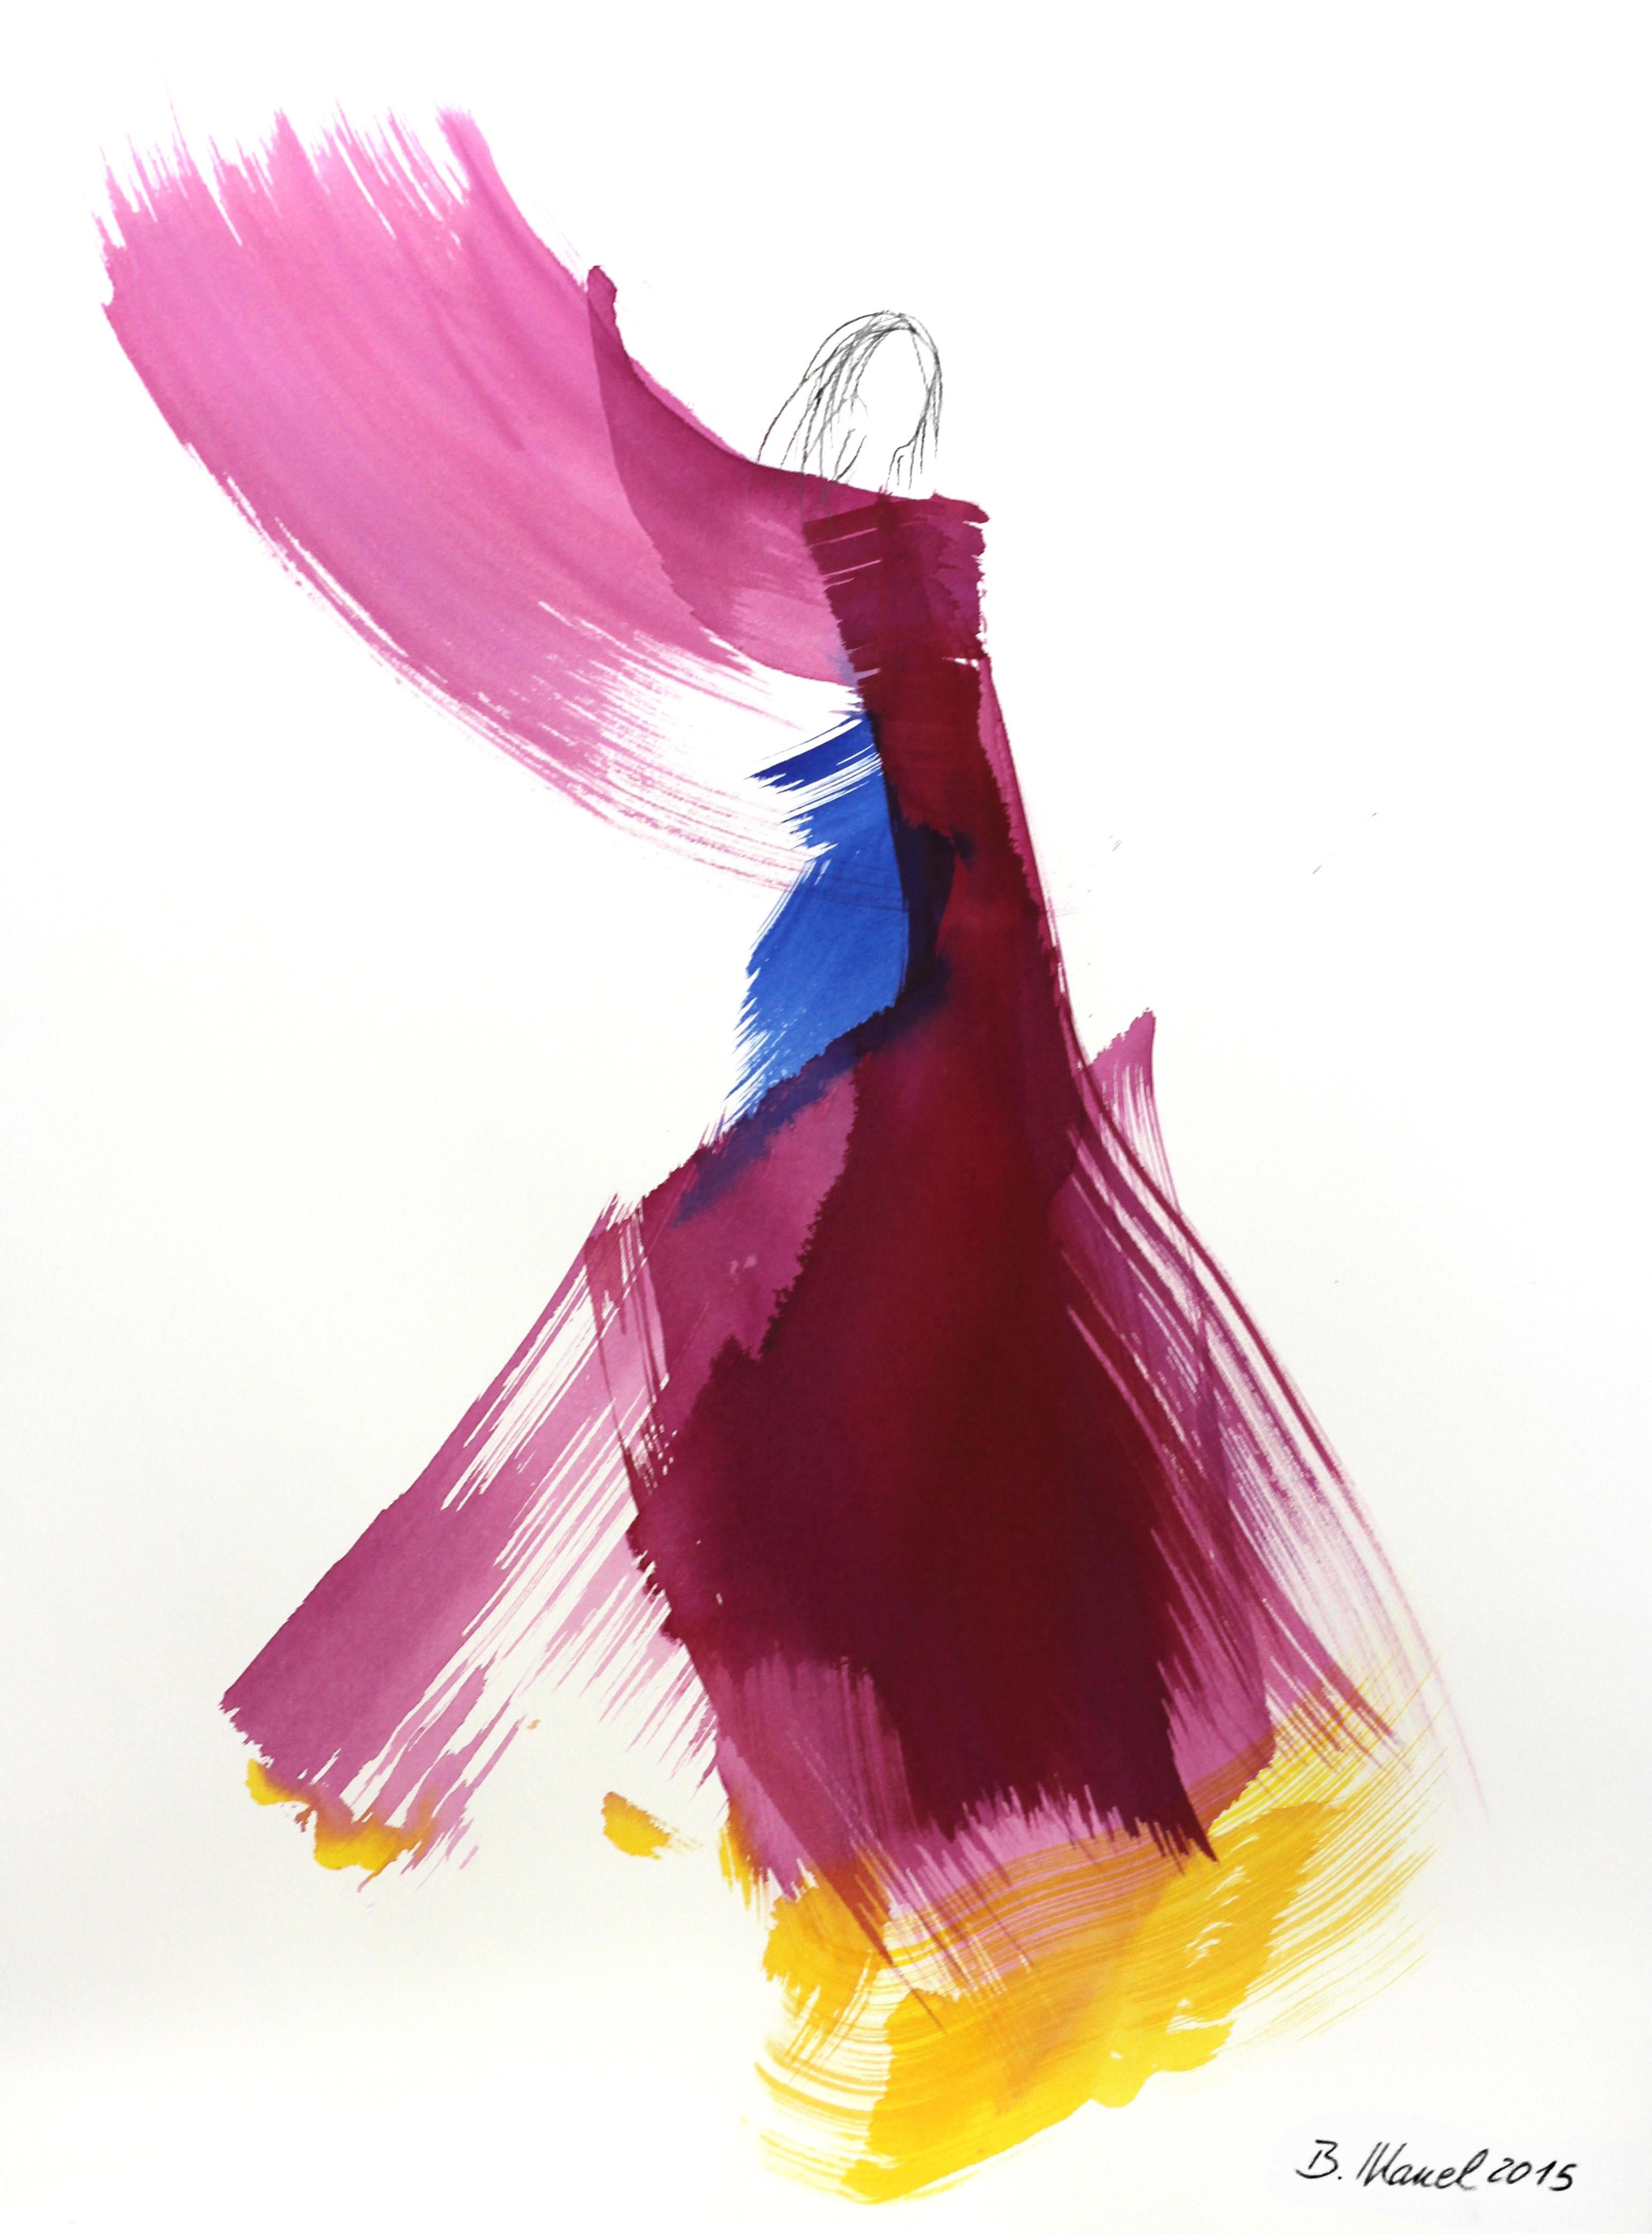 Bettina Mauel Abstract Painting - The Violet Dress 9